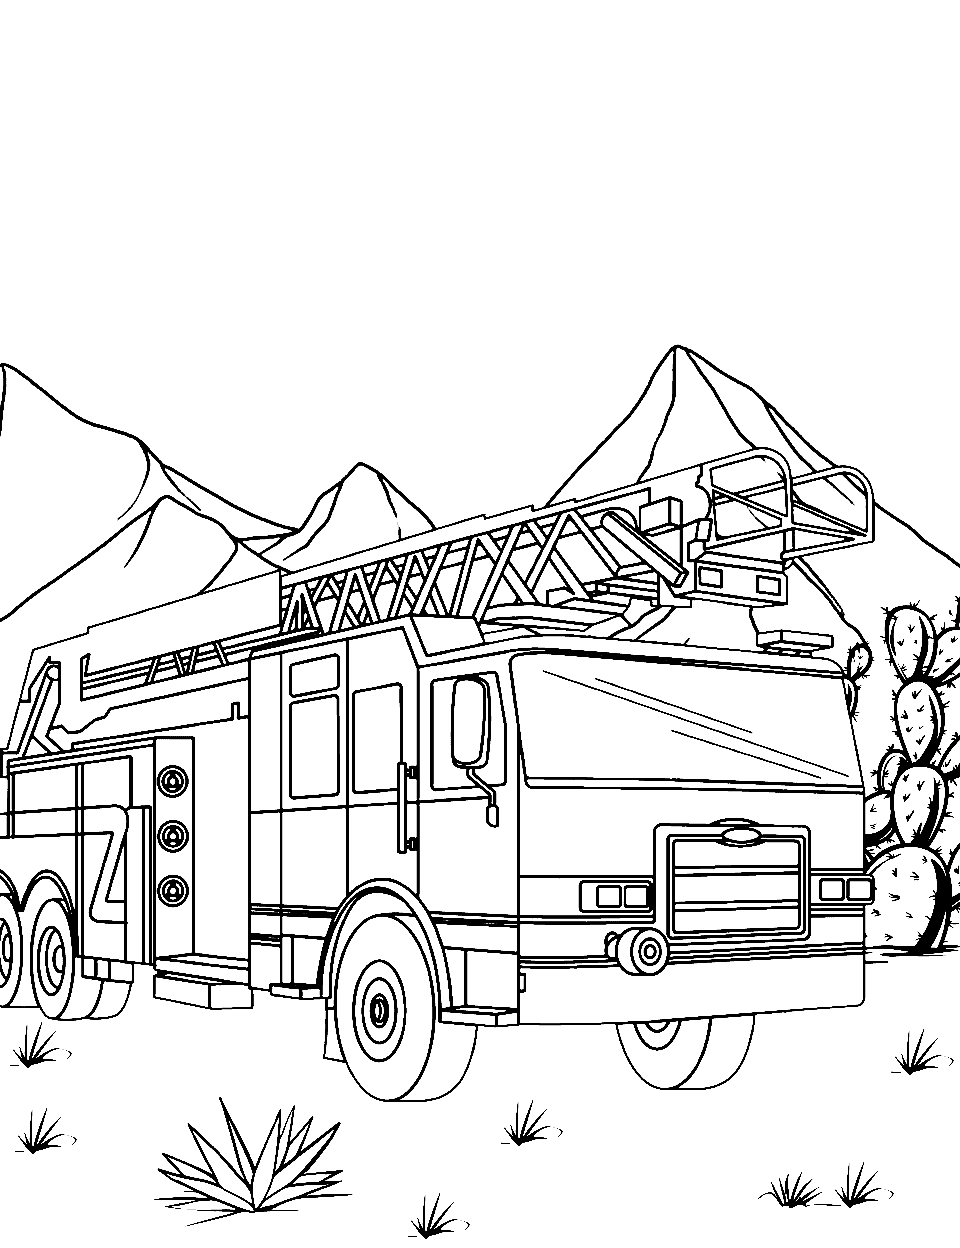 Desert Fire Patrol Truck Coloring Page - A fire truck in a desert landscape, with cacti around.